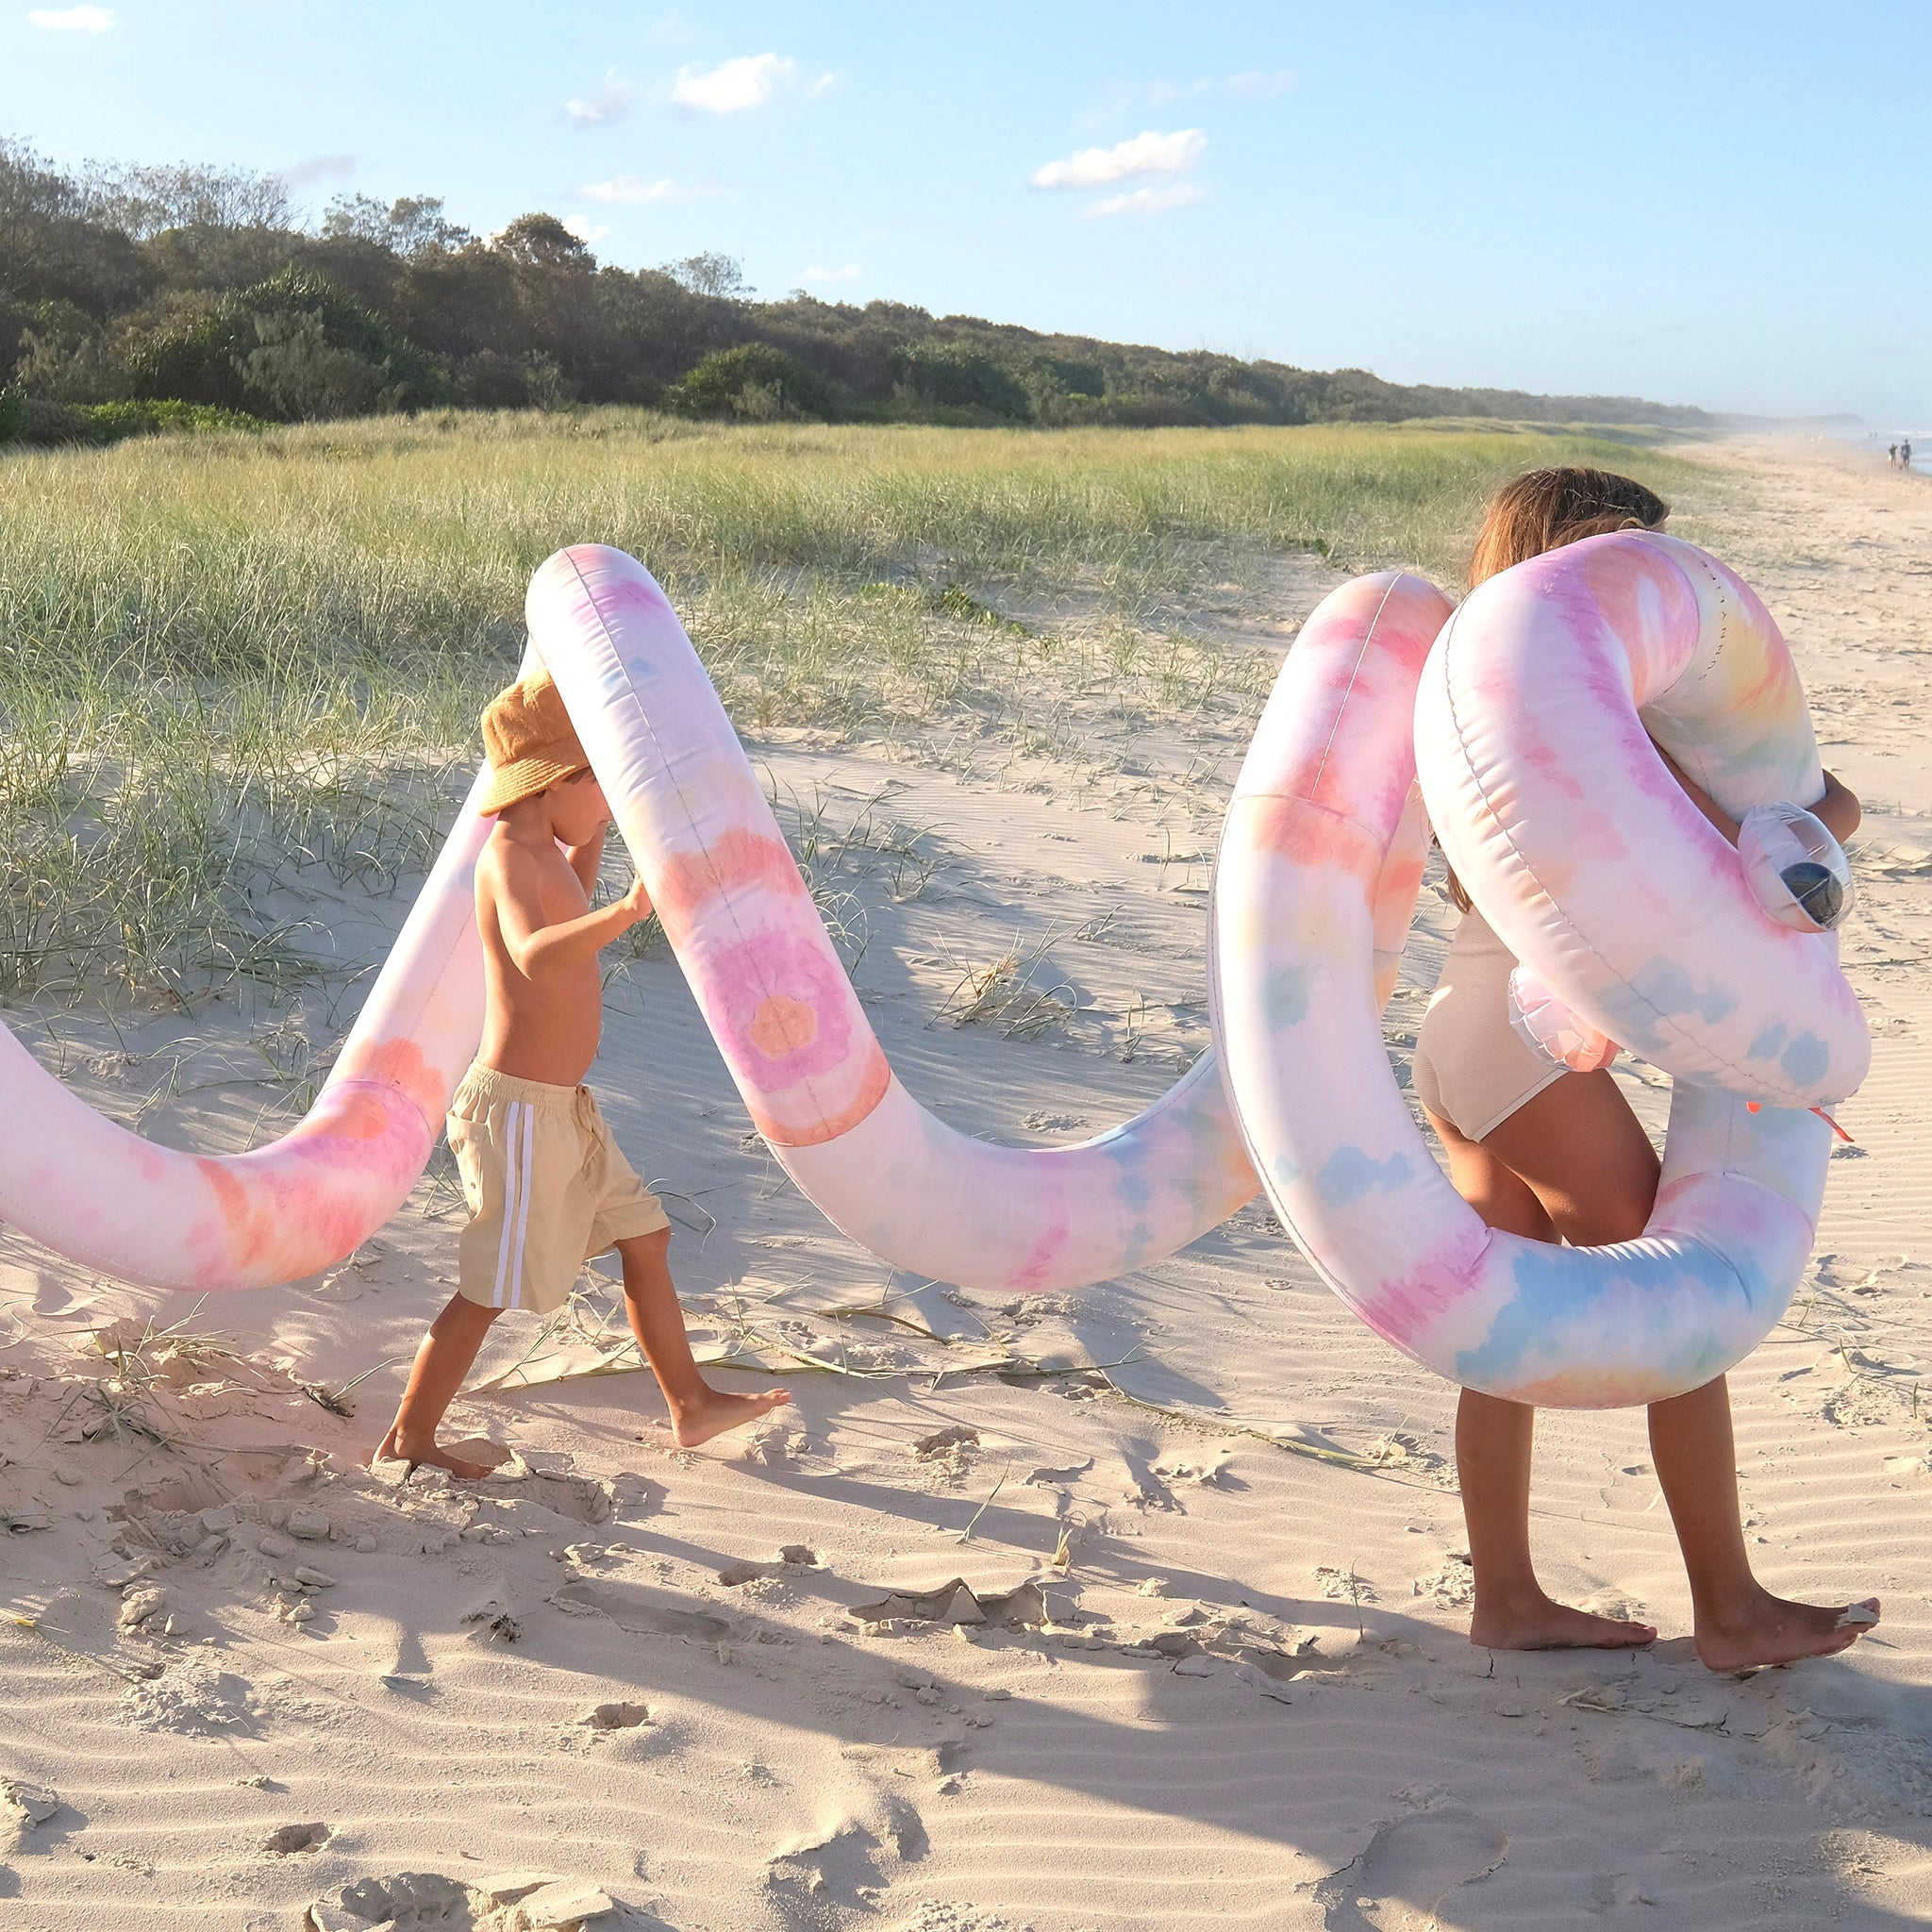 Giant Inflatable Noodle Snake | Tie Dye Multi